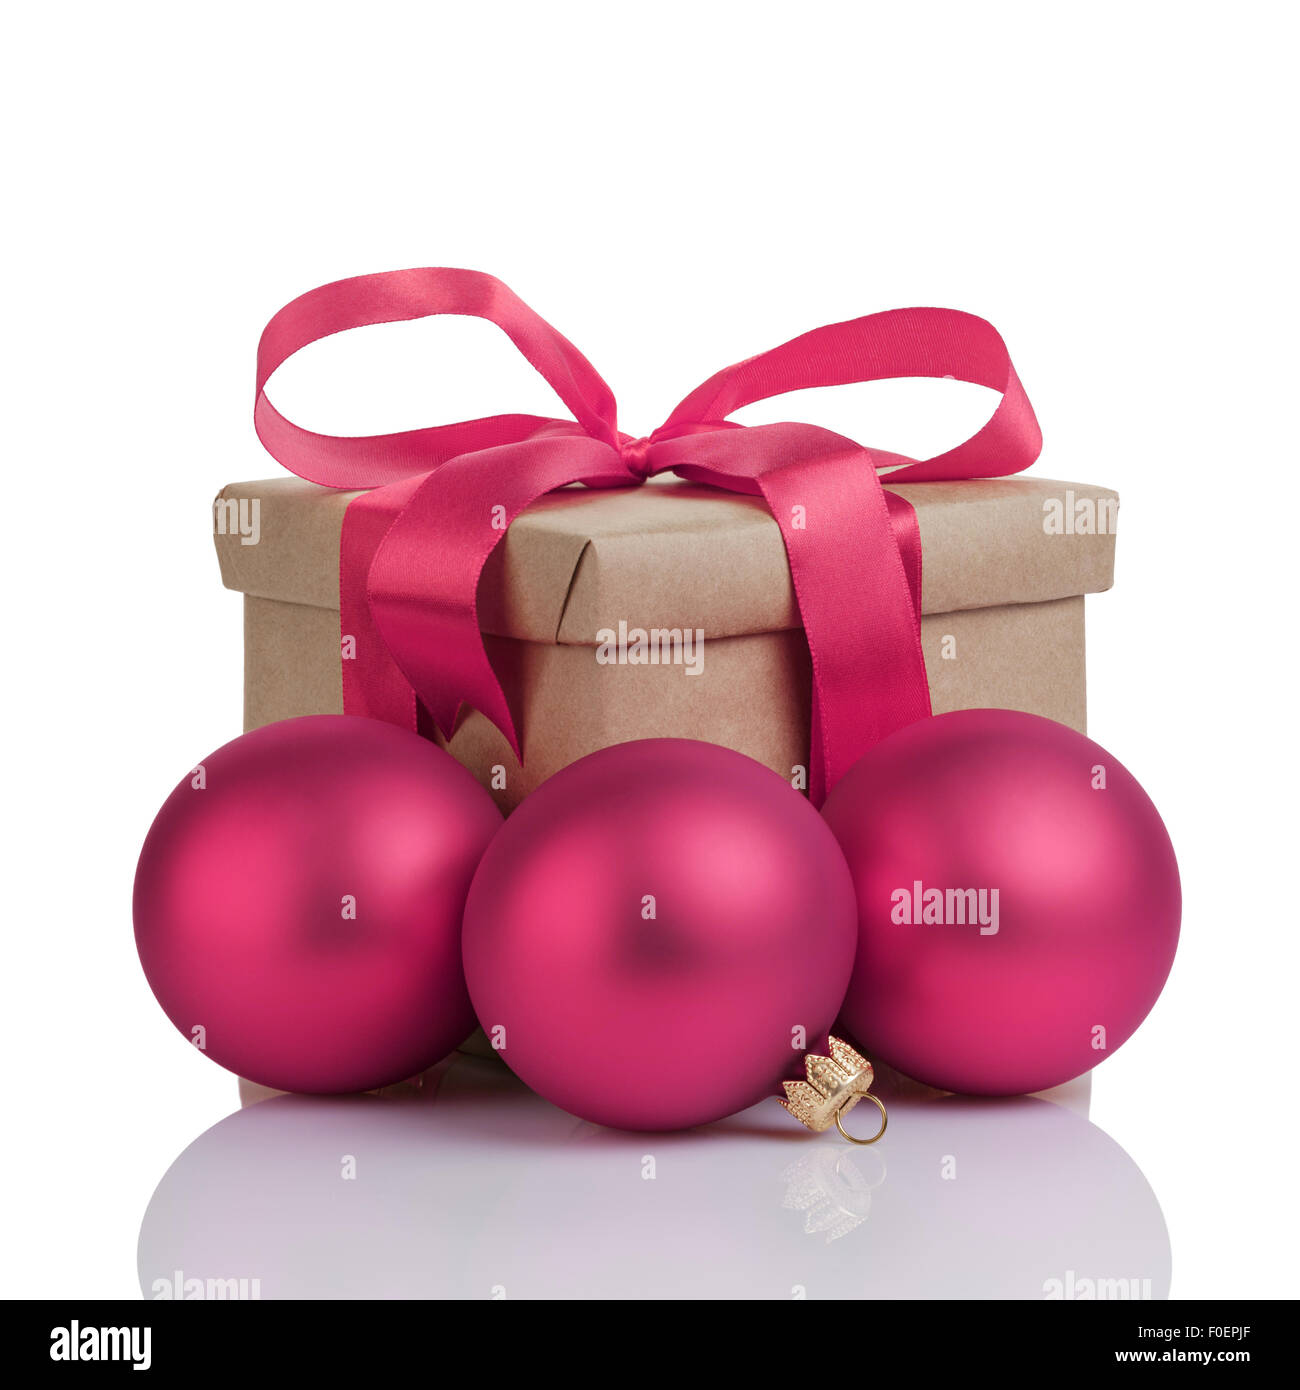 wraped gift box with purple bow, christmas balls and tag, isolated Stock Photo